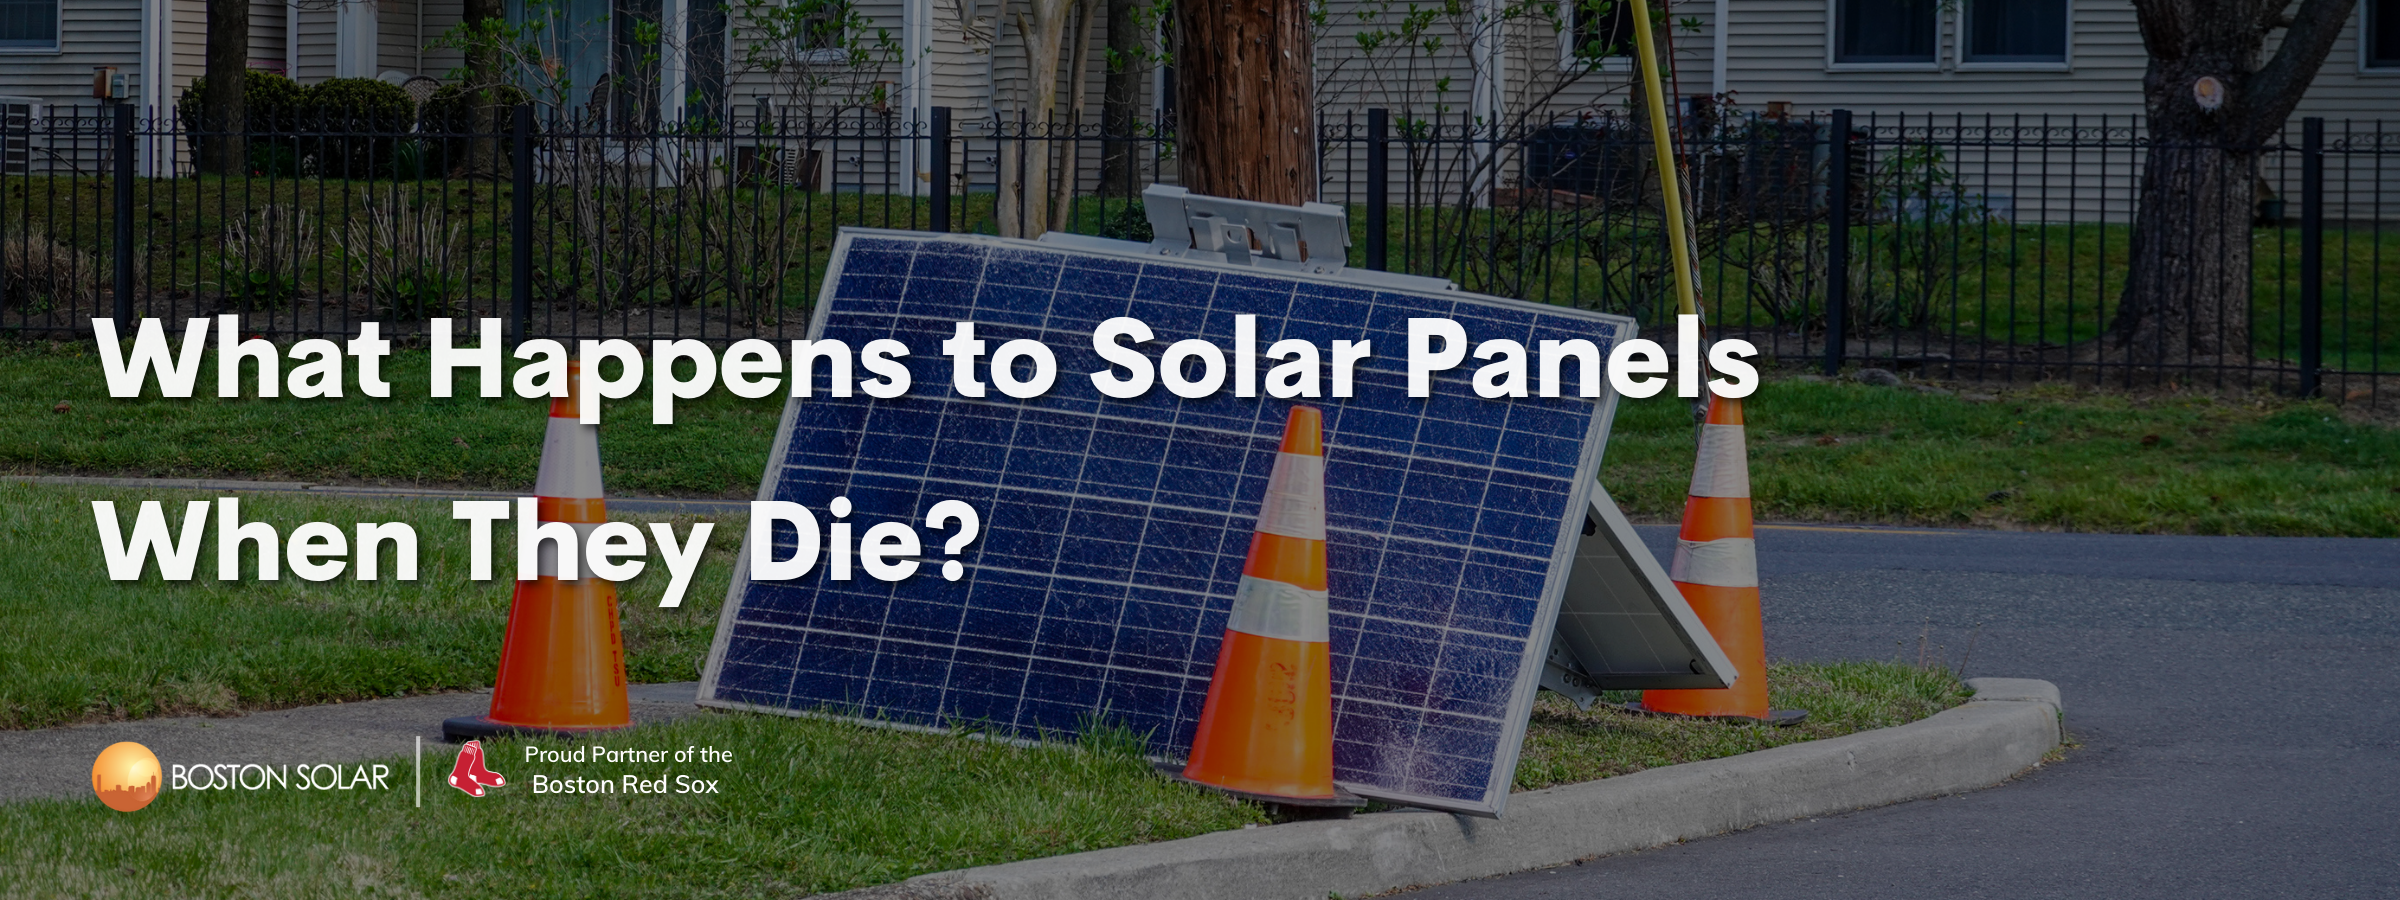 What Happens to Solar Panels When They Die?